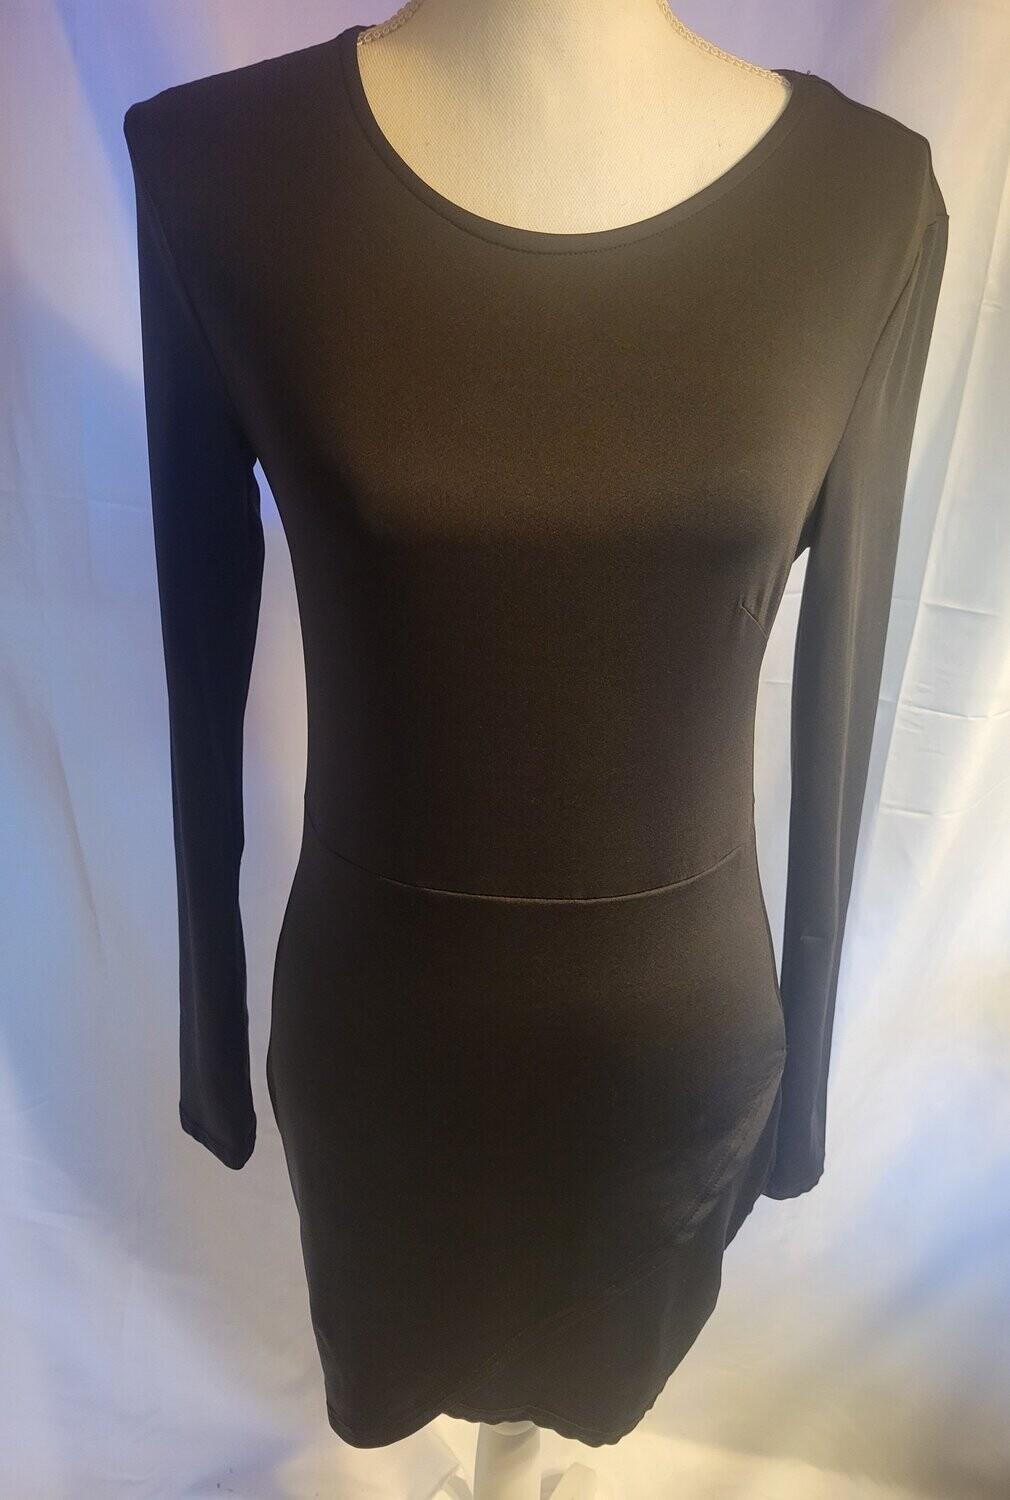 Girl's Black Long Sleeve Summer Holiday Party Short Bodycon Dress Gown Medium open side age: 8-12